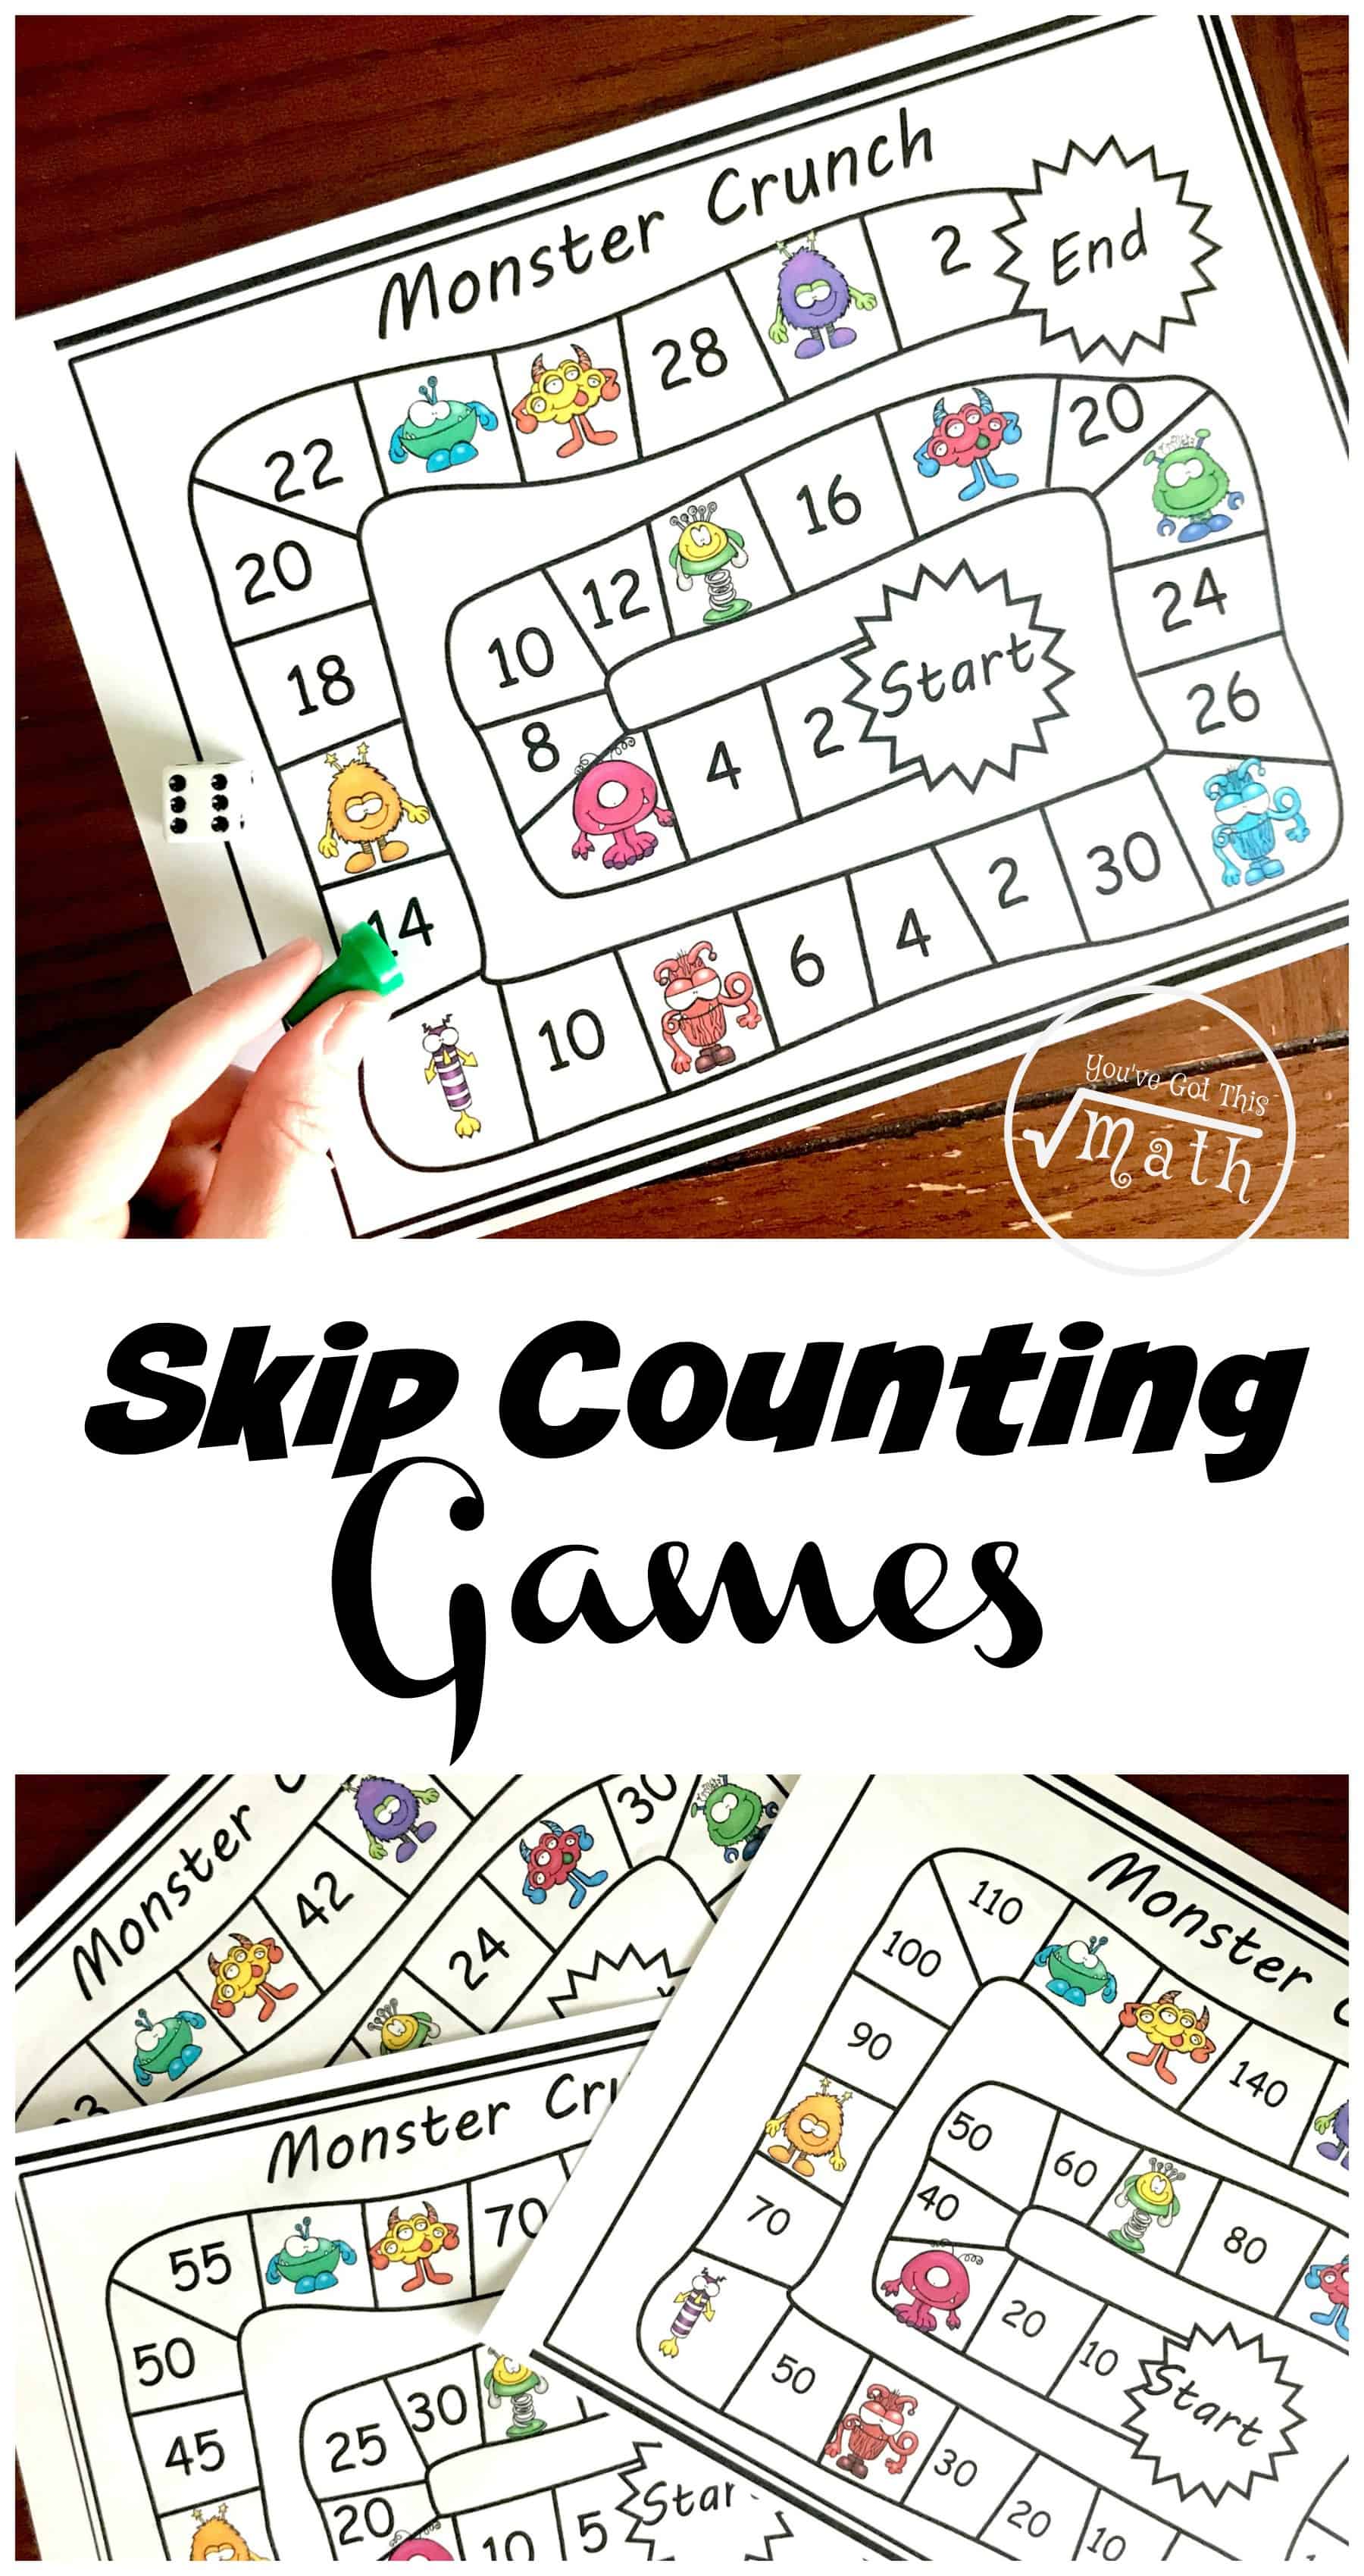 Do you need skip counting games for the classroom? These no-prep games help children learn to count by 2’s all the way to the 15’s.